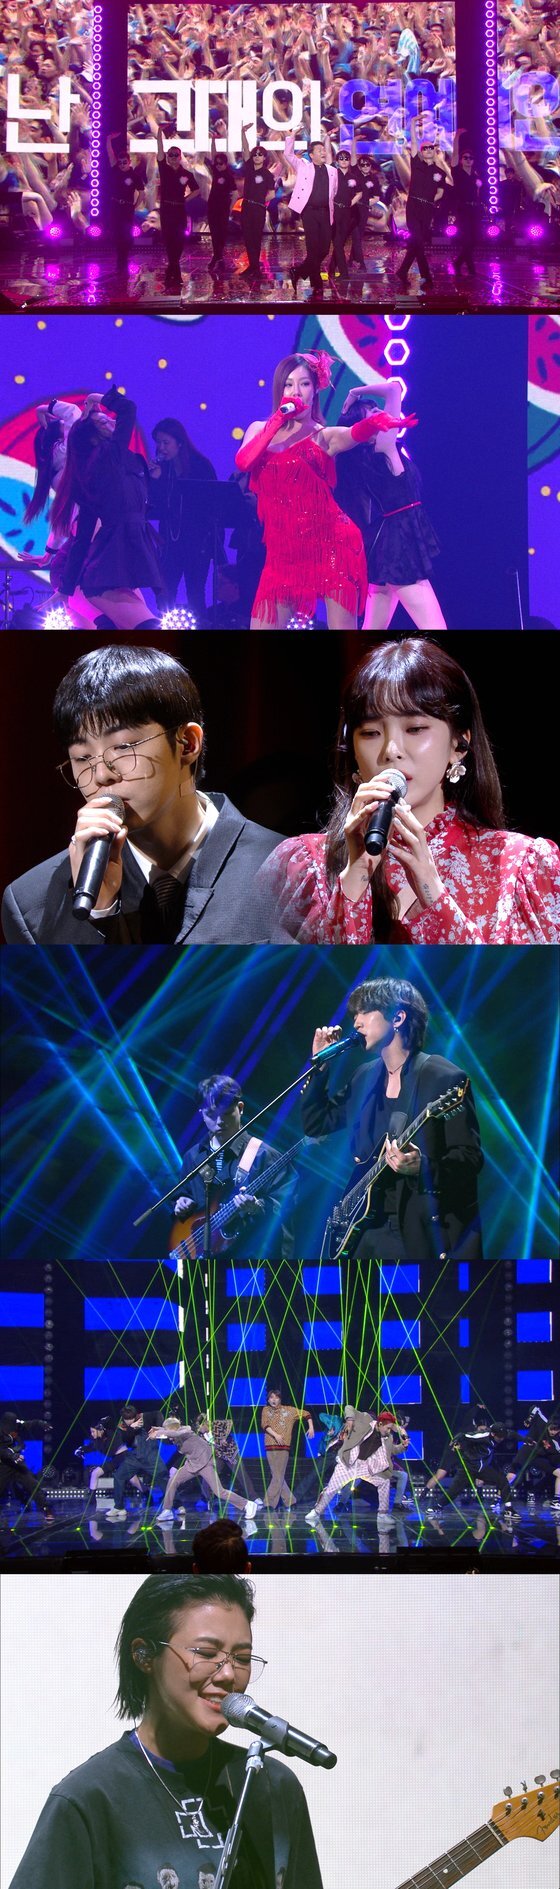 Immortal Songs: Singing the Legend has set up a PSY special for its 10th anniversary.On the 22nd, KBS2 Immortal Songs: Singing the Legend will feature the 10th anniversary special feature and set the stage for PSY, which celebrates its 20th anniversary this year.PSYs famous songs are reinterpreted by various junior musicians such as Jessie, Shin Yong Jae, Choi Jung Hoon, ATiz, Swings, Giri Boy and Heize, Lee Seung-Yoon, and new boy.PSY appeared in the music industry in 2001 with its debut song New; it was very popular with its stage costumes and performances at the time.Since then, he has been ranked second on the US Billboard chart with Gangnam Style, causing K-pop syndrome all over the world.I was also recognized for my ability to produce and produce hits such as Lee Seung Gi, Seo In Young, and Kim Jang Hoon.PSY will show off the spectacular stage of The God of Performance as a special 10th anniversary feature of Immortal Songs: Singing the Legend.The broadcast will be broadcast on the 22nd and 29th for two weeks.